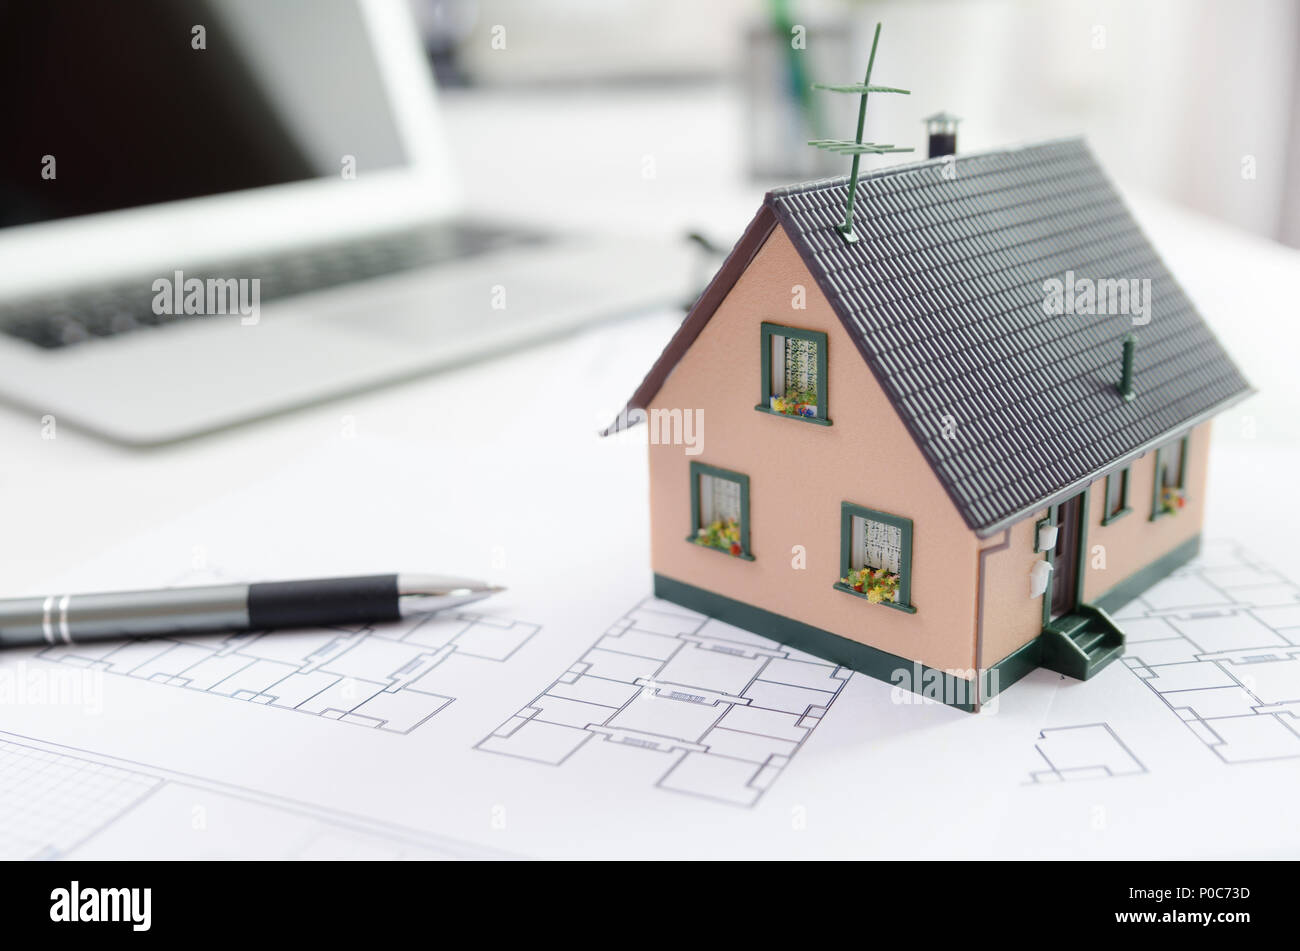 House model on desk, mortgage, investment or house building concept Stock Photo